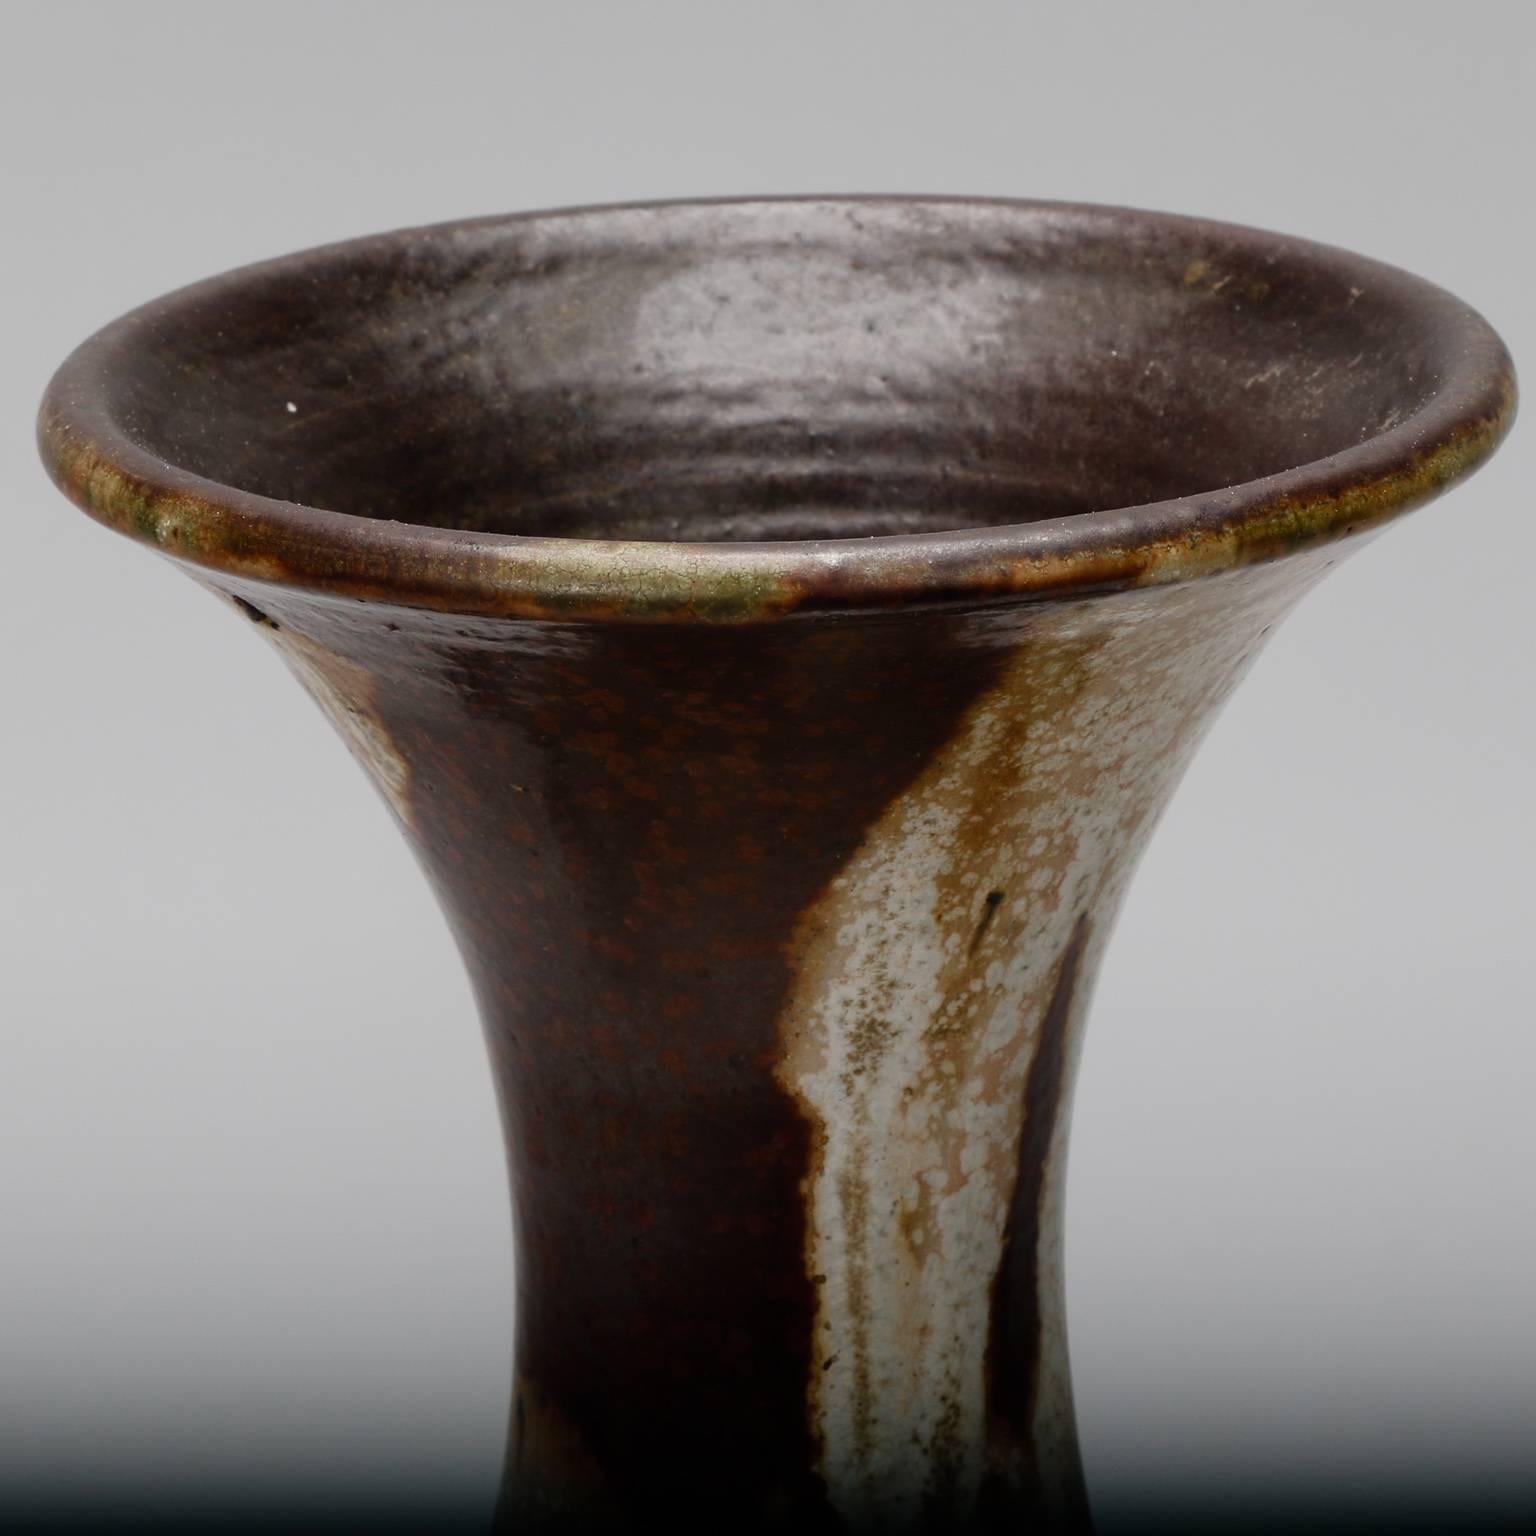 Ceramic vase signed by Belgian artist Maurice Pitot has a drip glaze in earth tones with slender neck and applied, sculpted leaves.